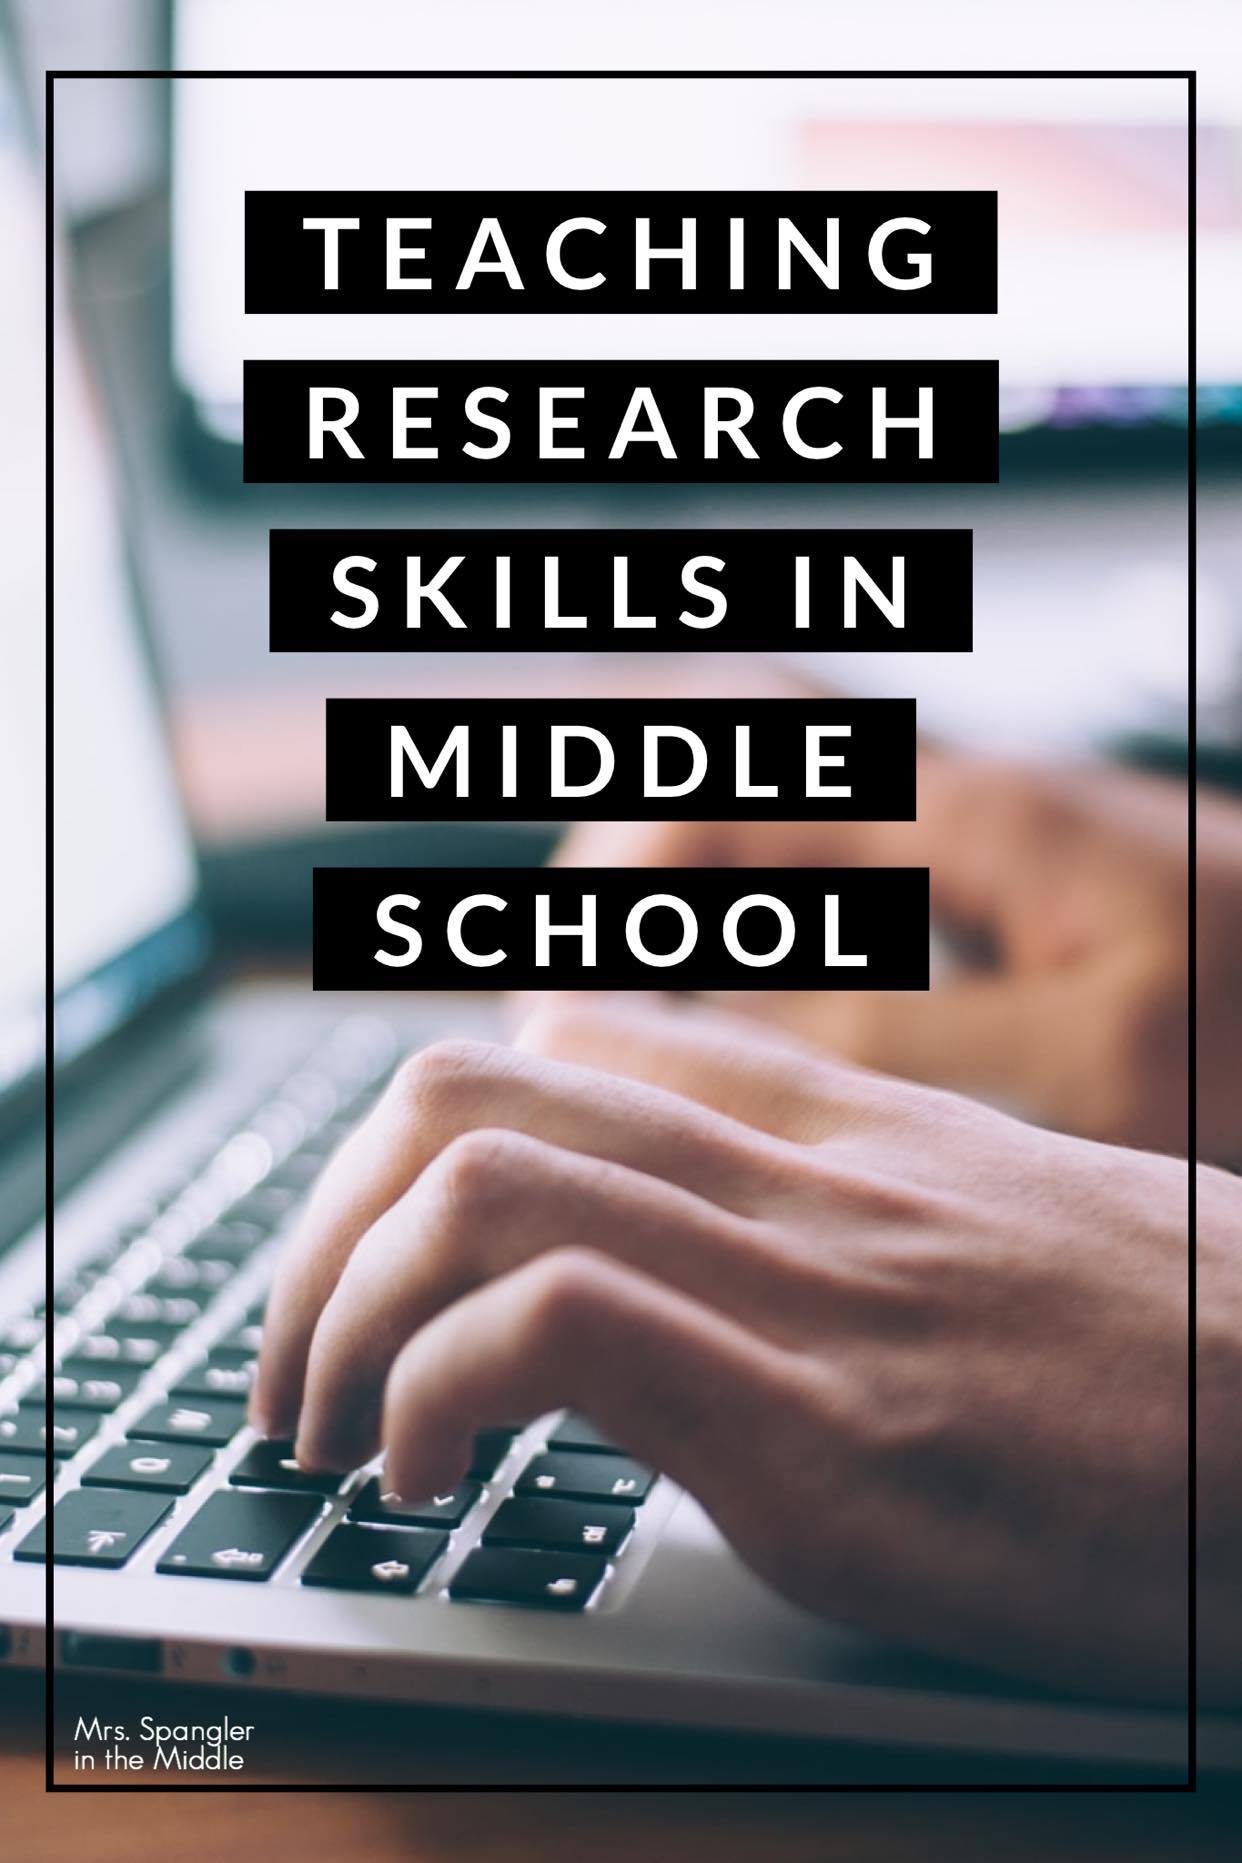 how to teach research skills to middle school